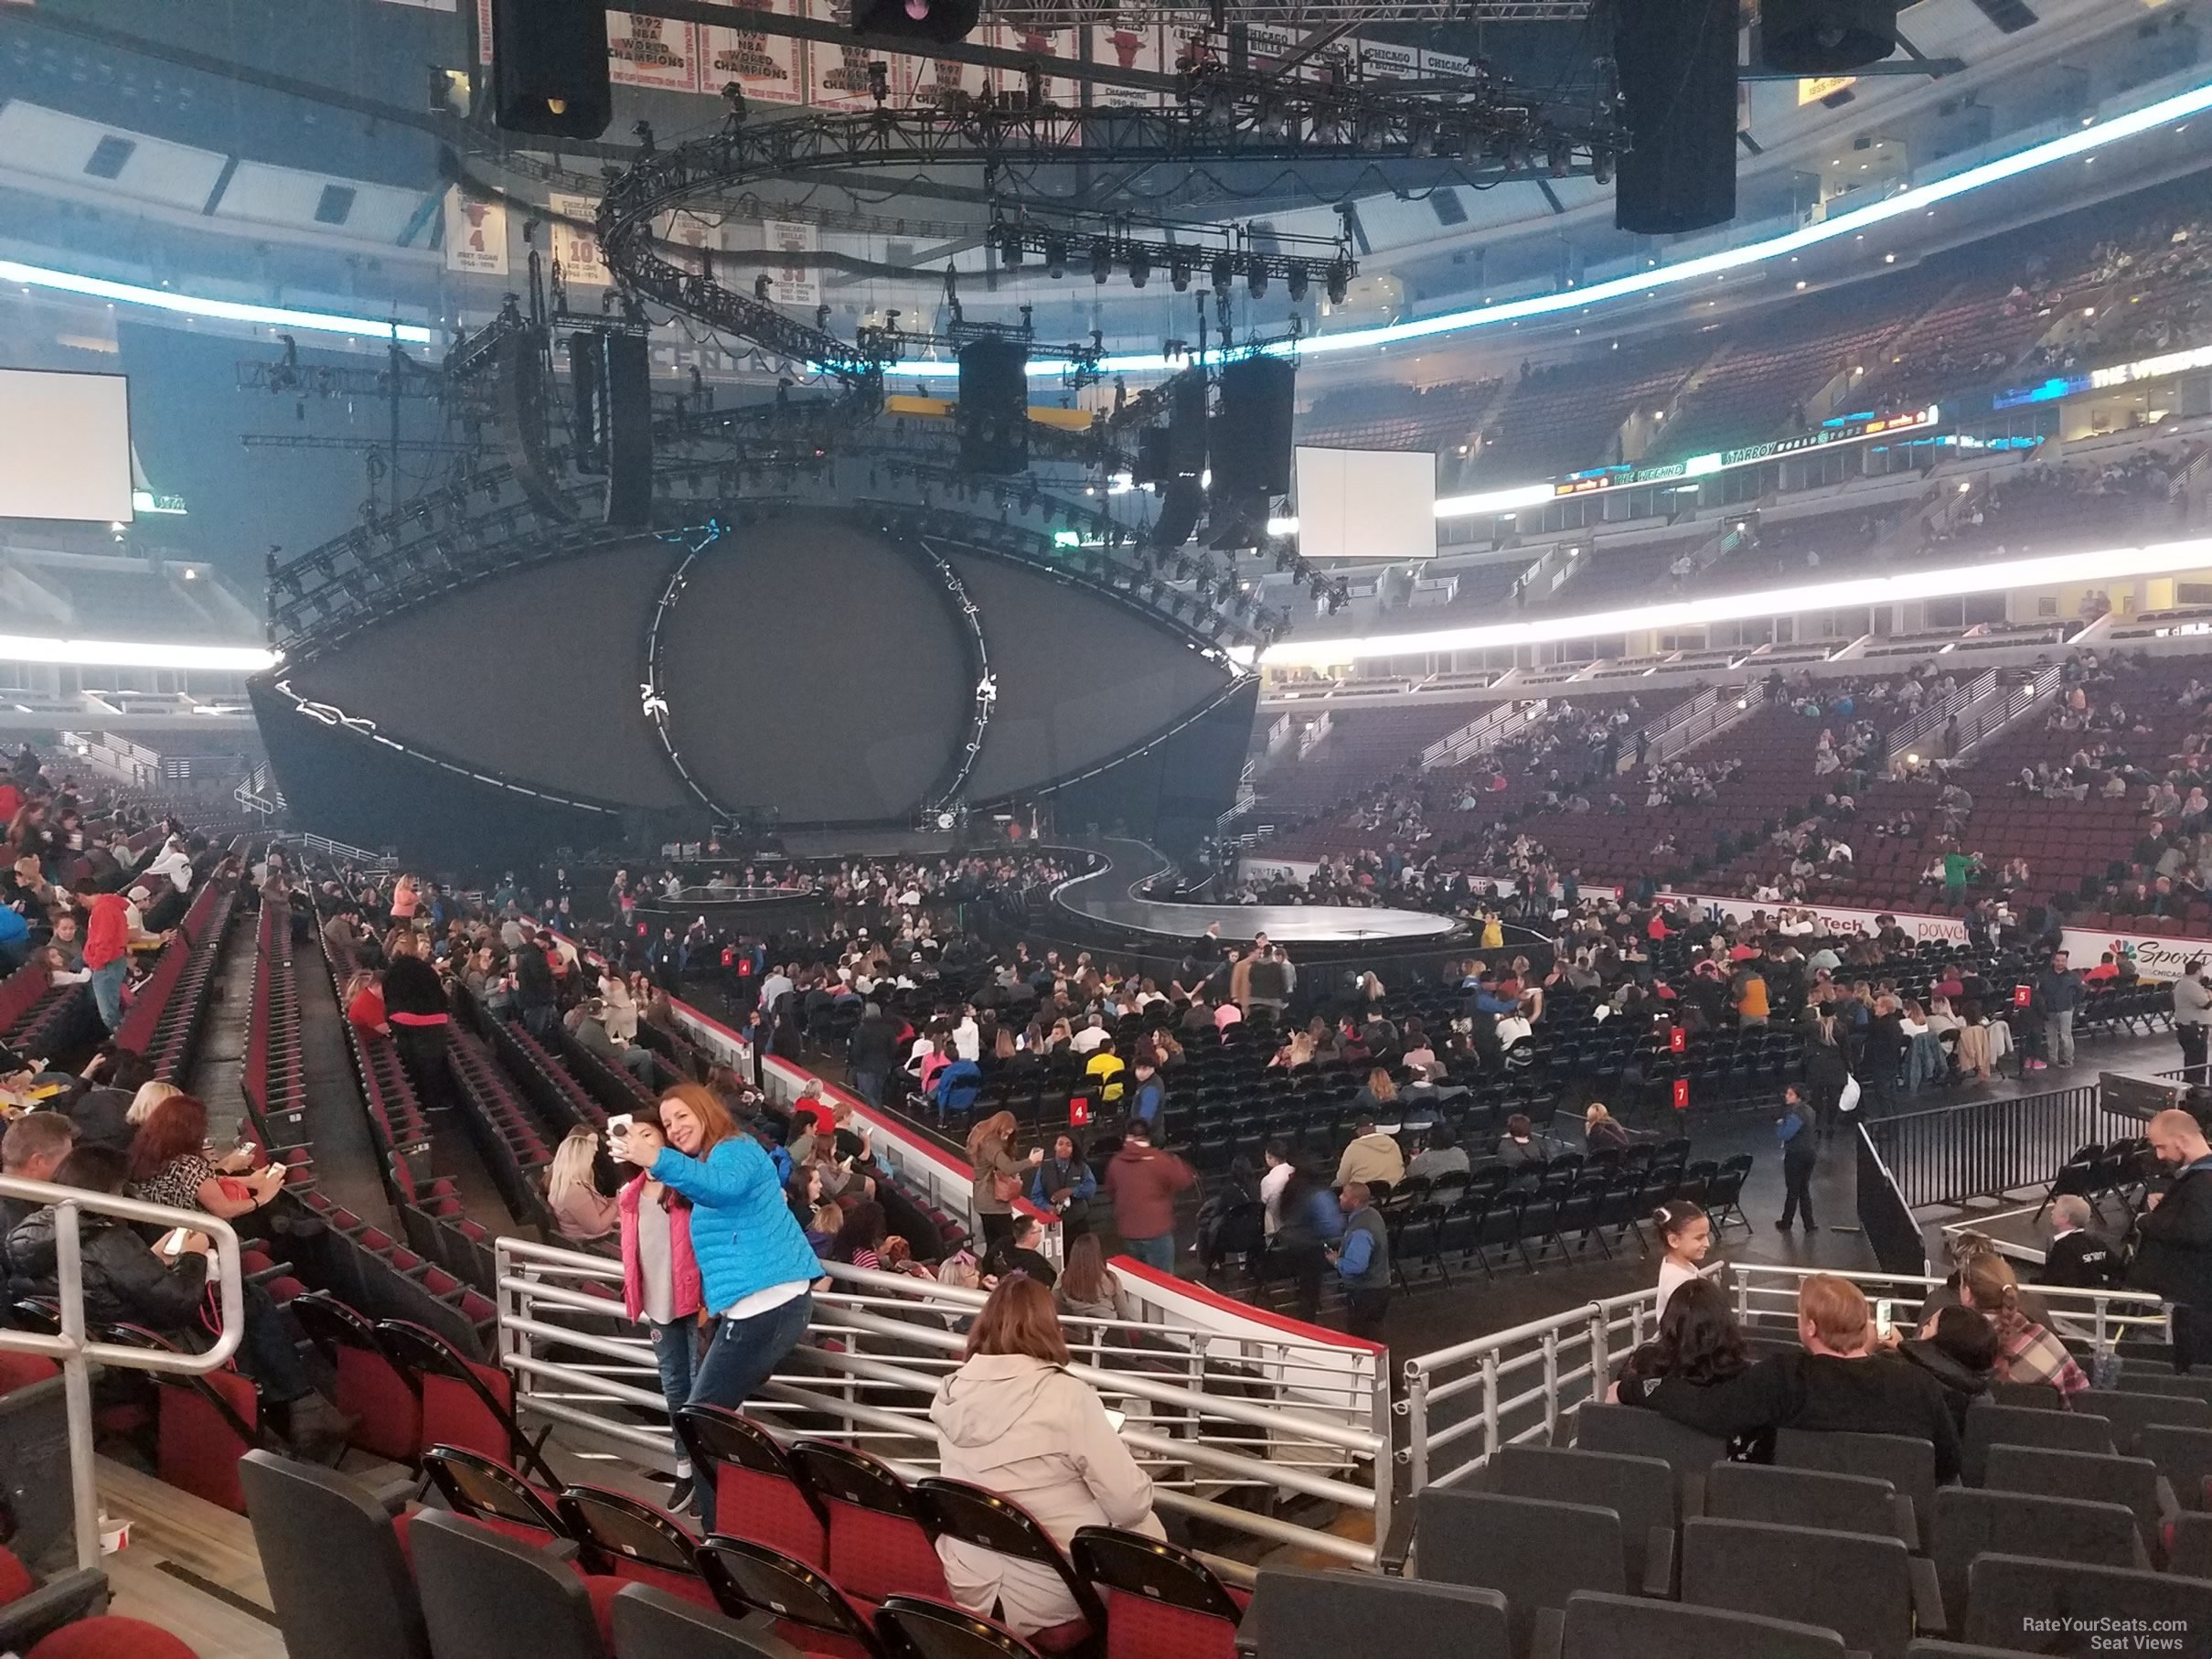 section 108, row 12 seat view  for concert - united center